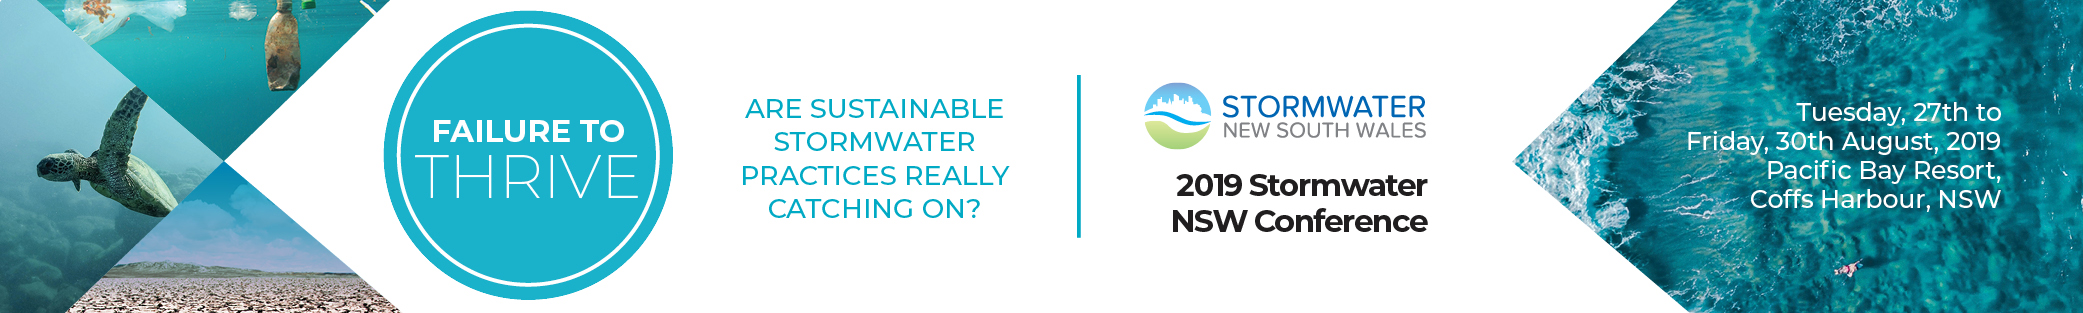 2019 Stormwater NSW Conference Banner